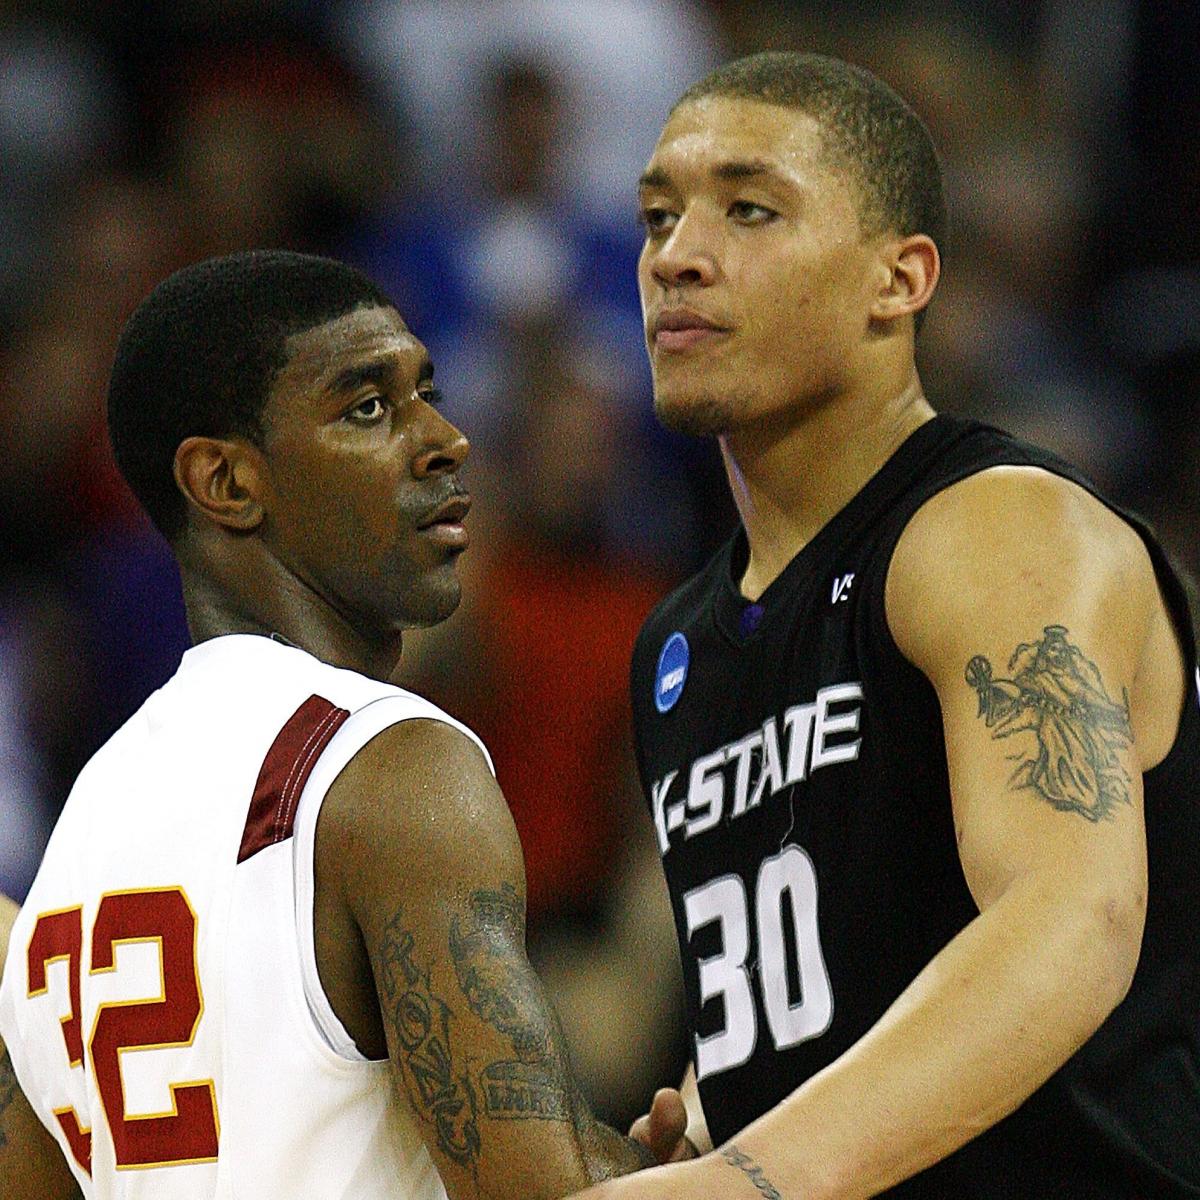 Ranking the 10 Greatest One-and-Done Players in College Basketball